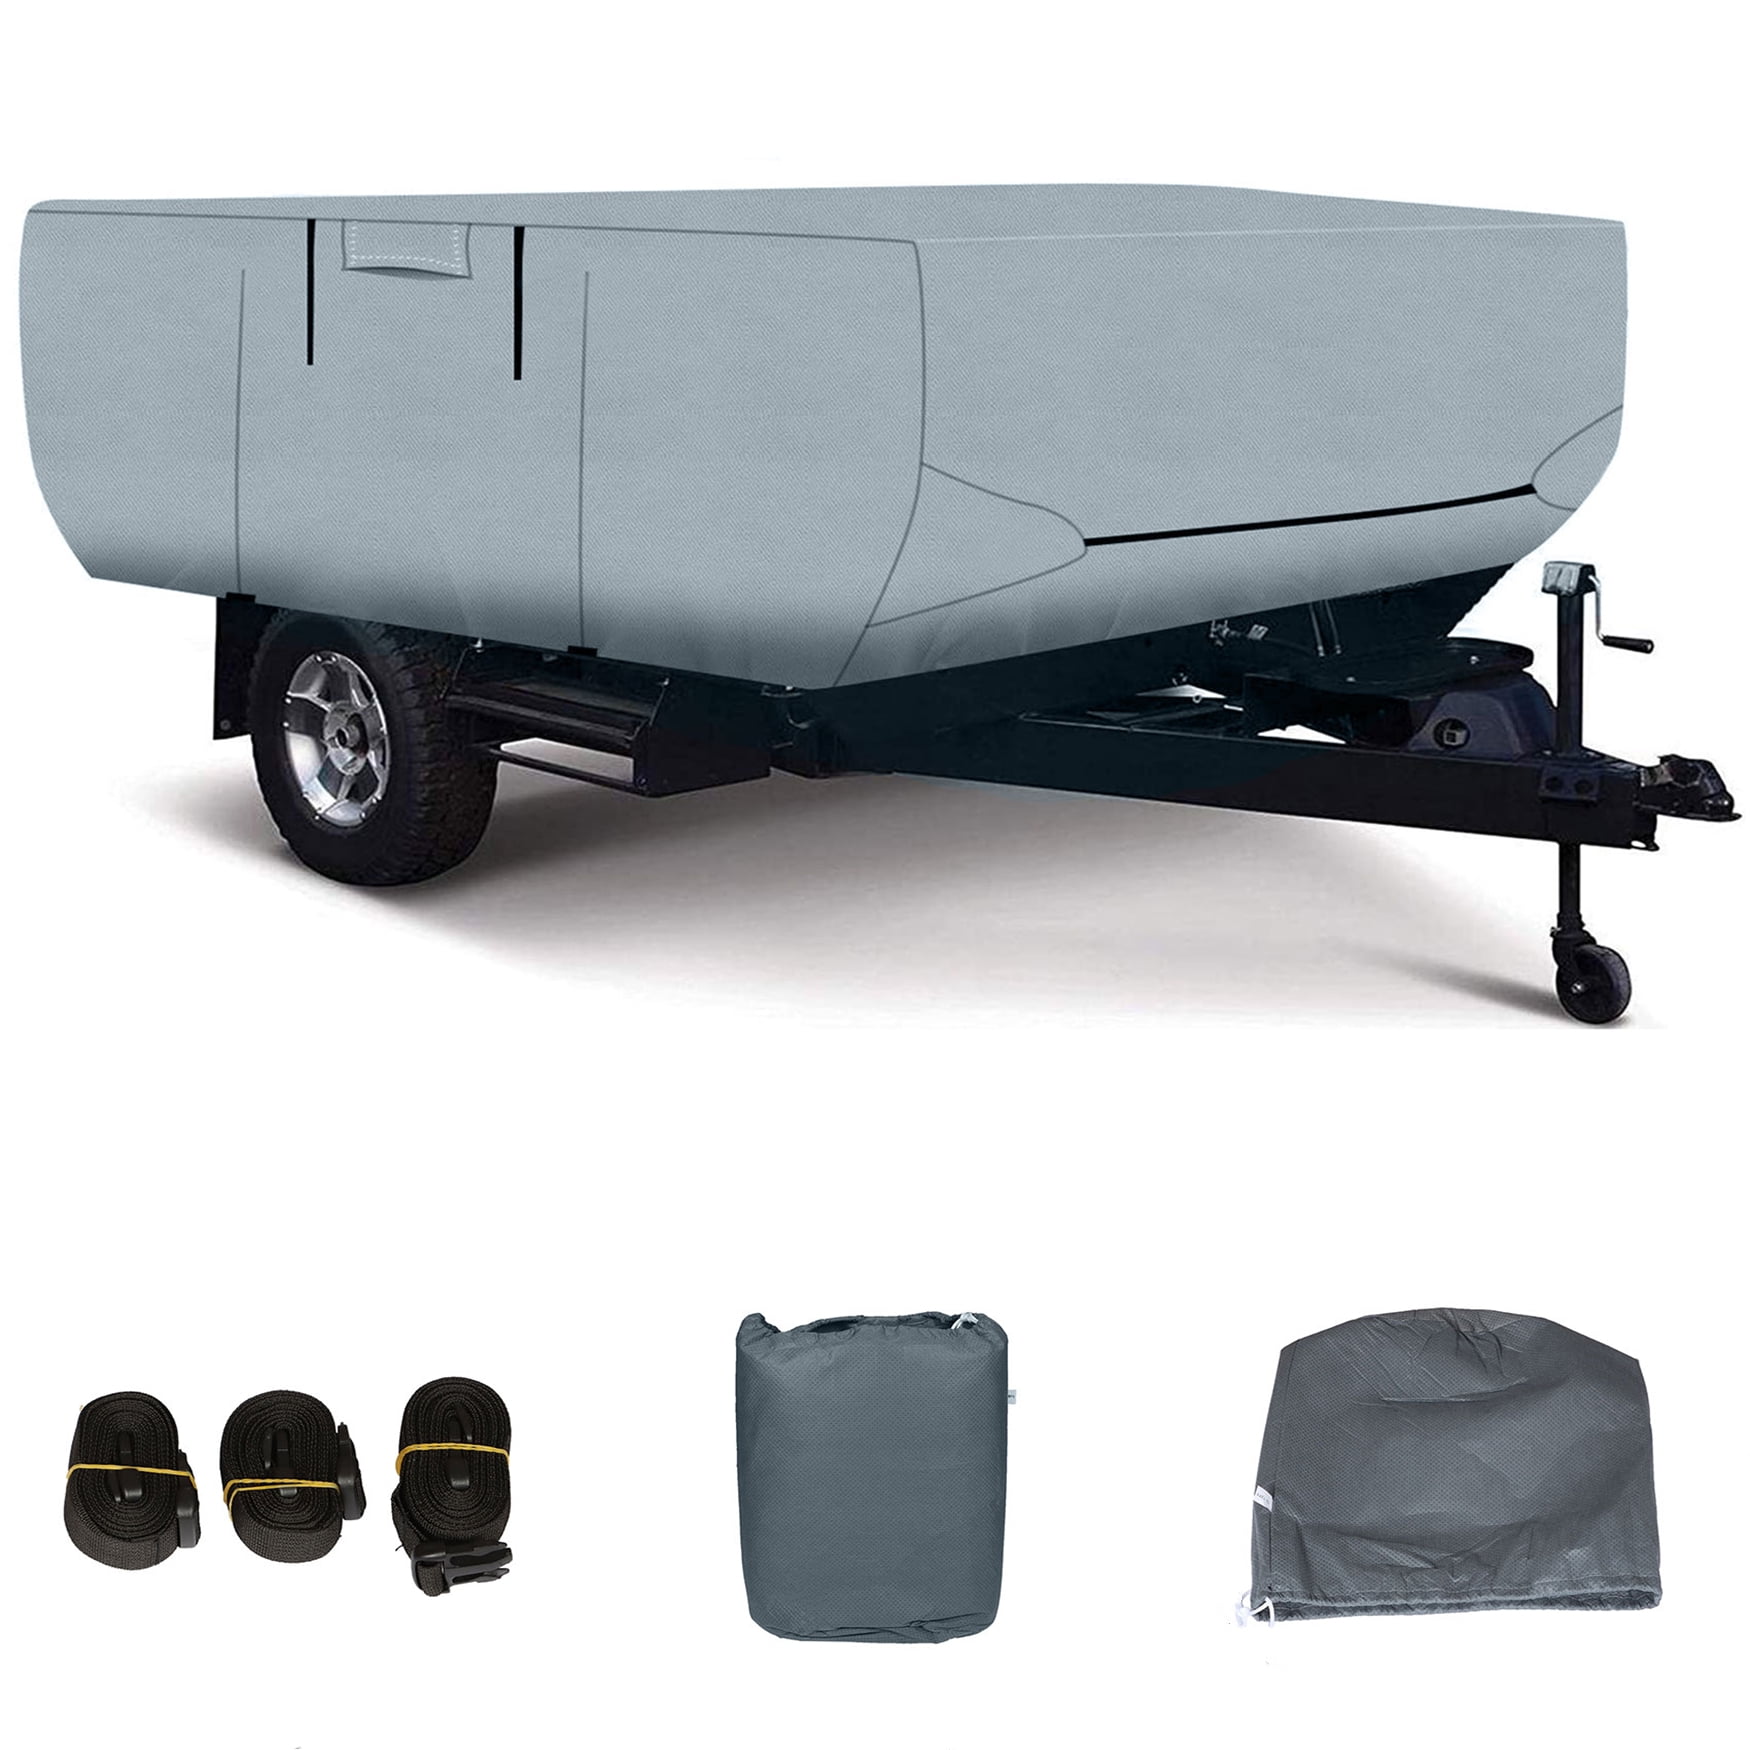 Gray Umbrauto Pop Up Camper Covers Waterproof Pop Up Folding Trailer Cover 3 Layers Polypropylene Breathable Ripstop Anti-UV Pop-Up Tent Trailers Cover Fits 8' 10' Trailers 